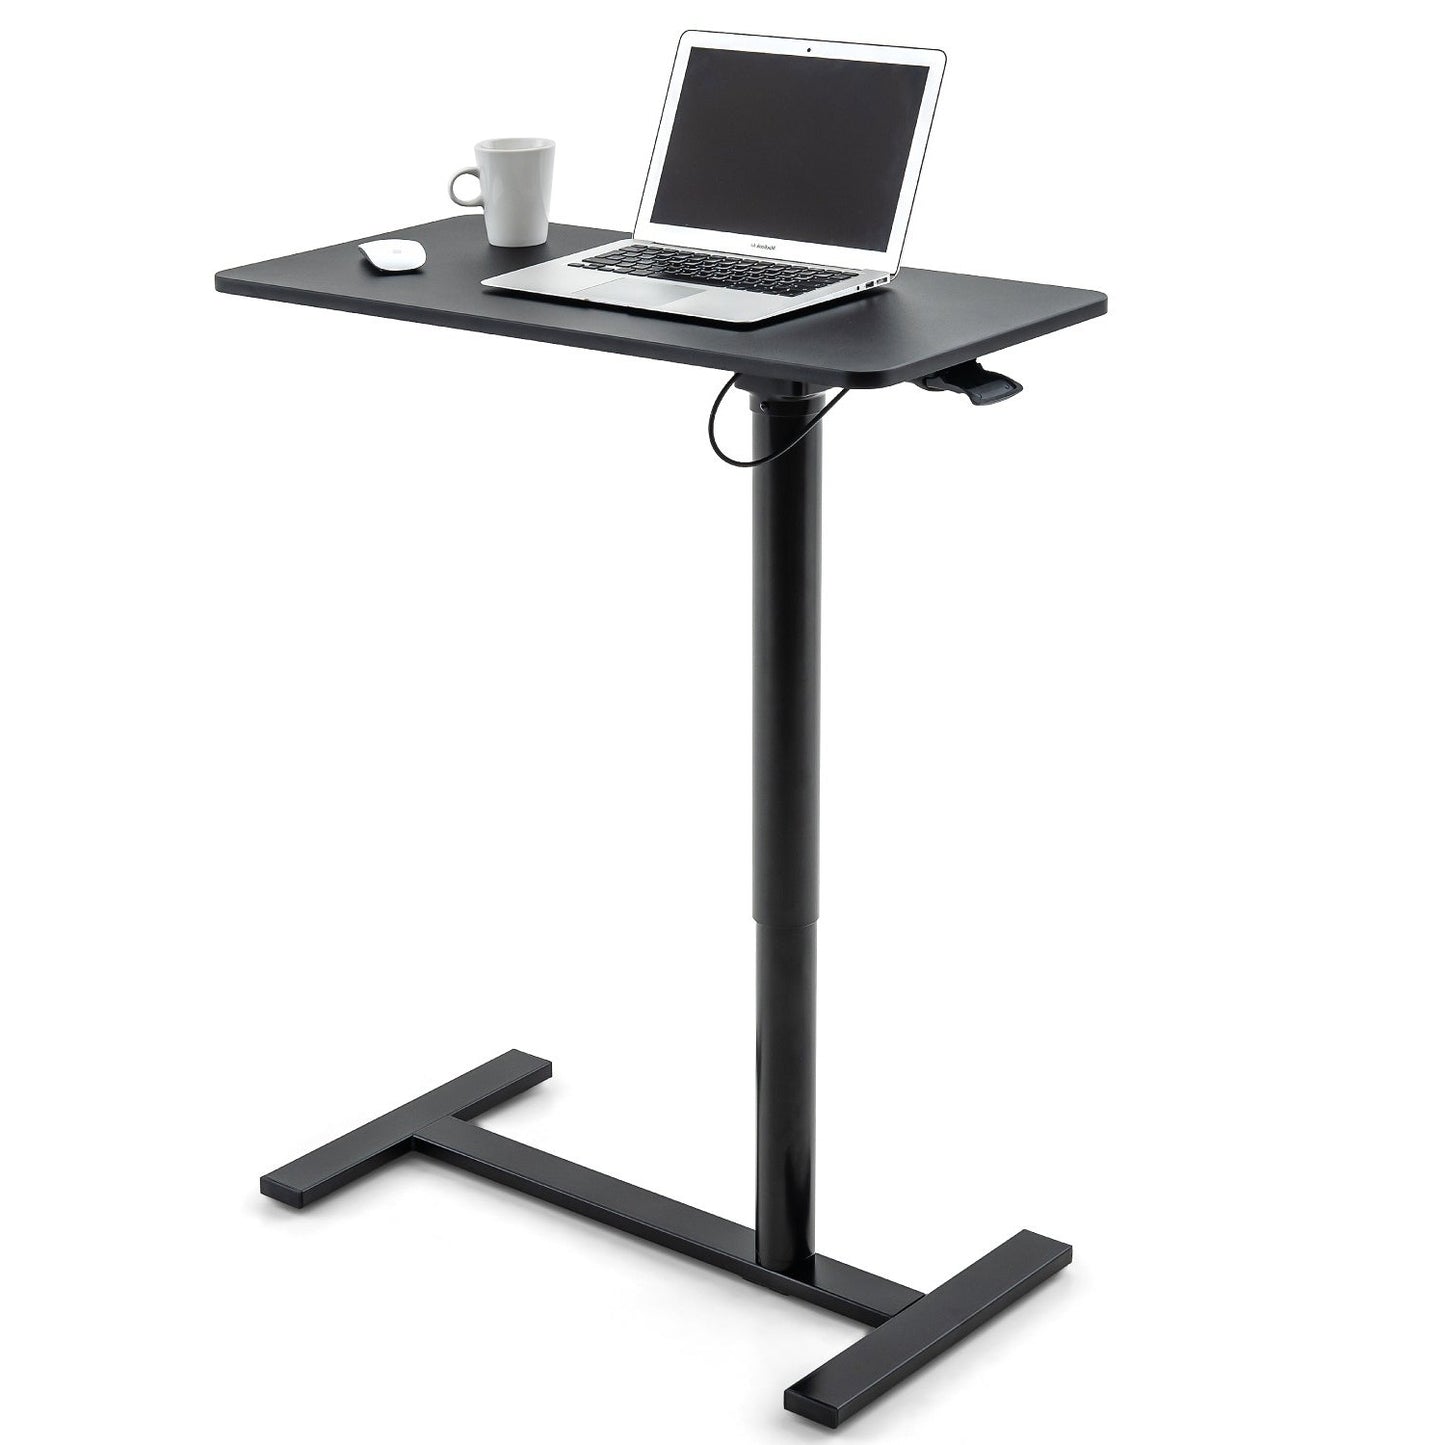 Tatkraft Bliss - Airlift Pneumatic Sit-Stand Laptop Desk with Wheels